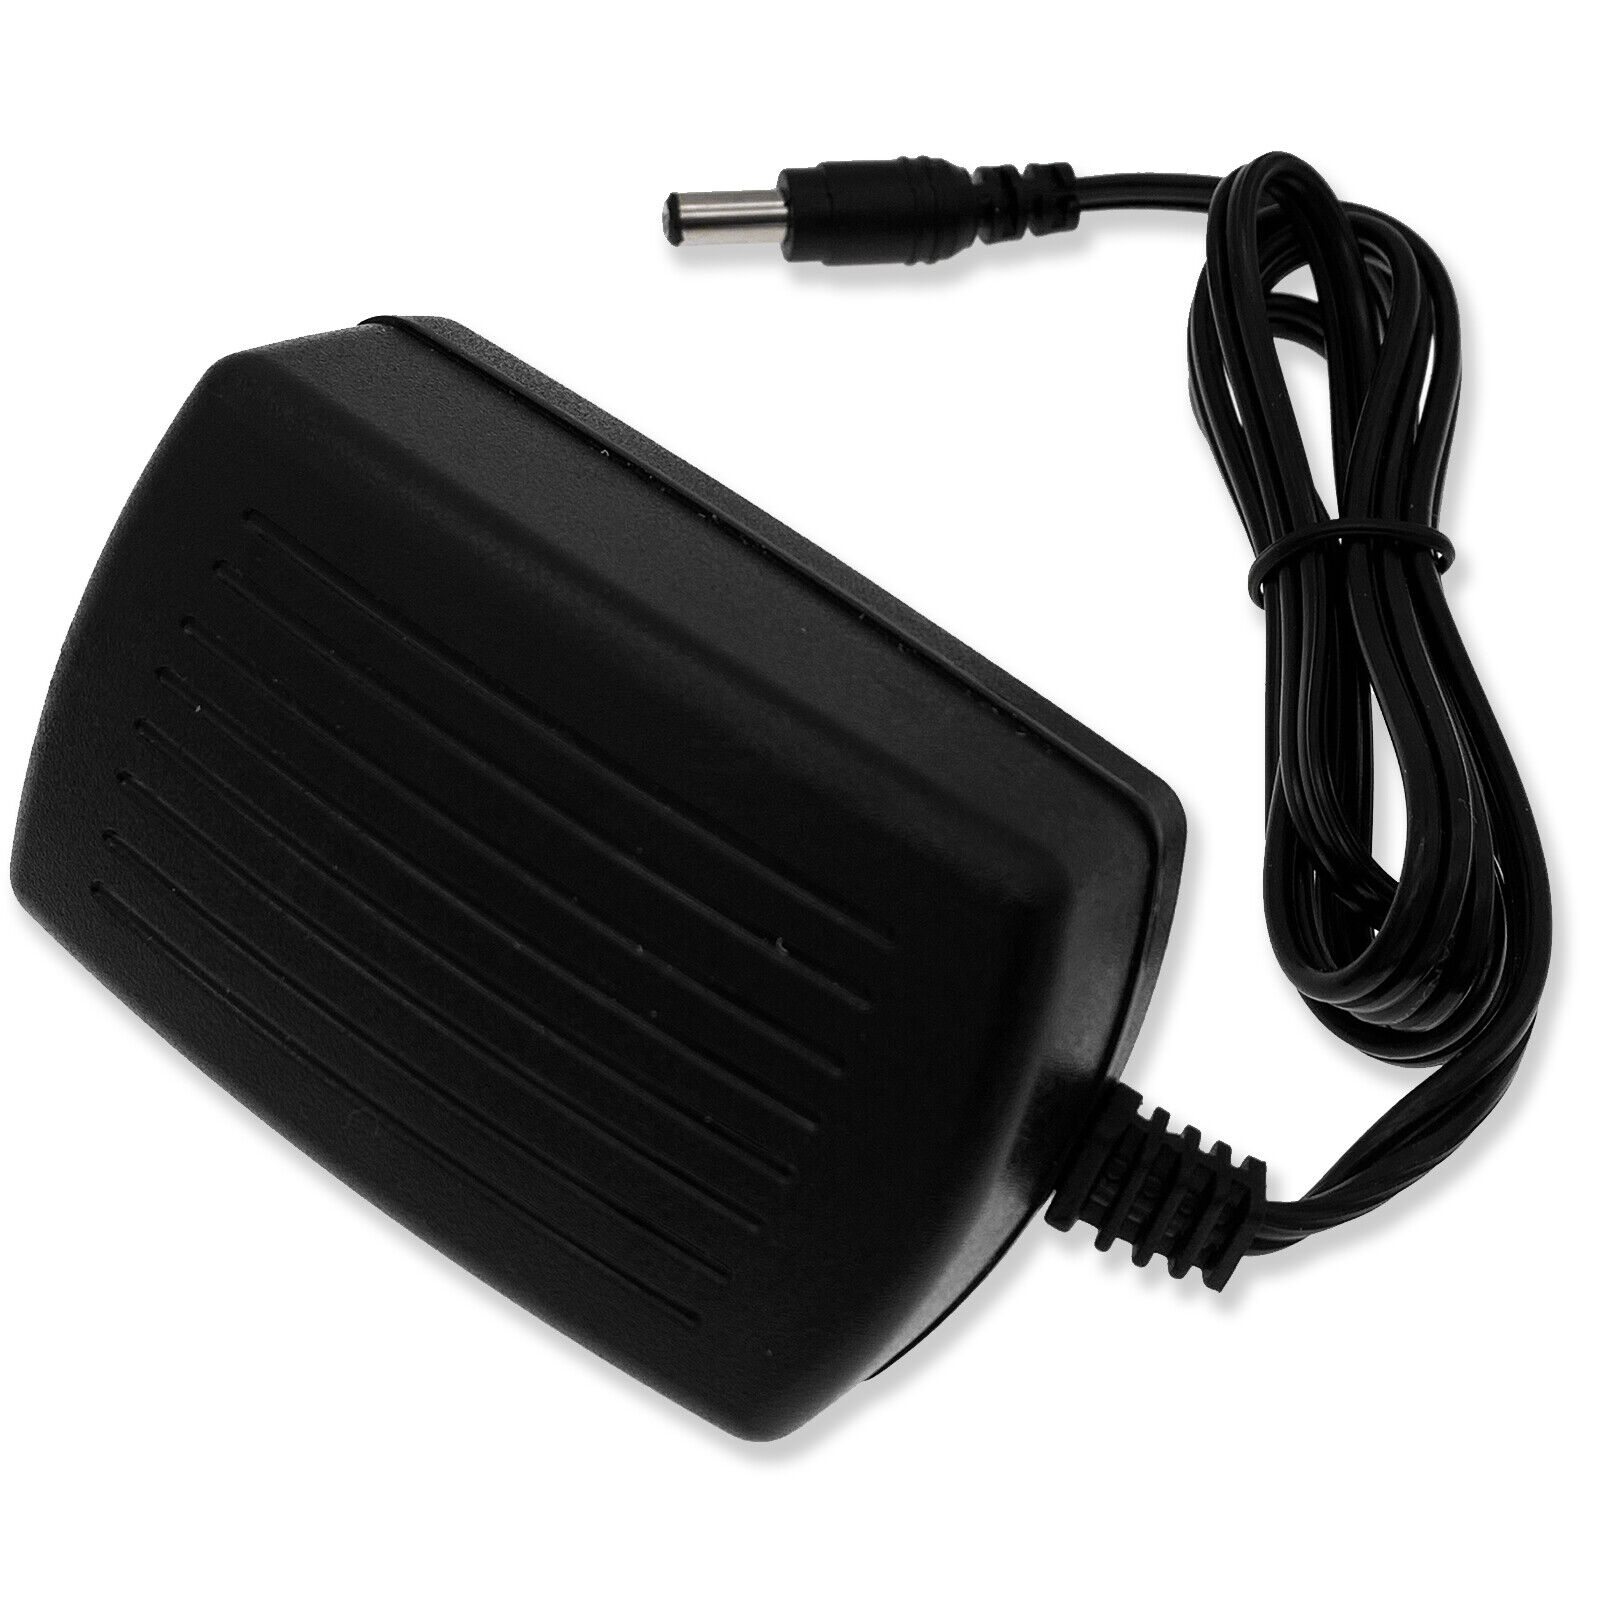 *Brand NEW*DELL WYSE 3040 Thin Client Power Supply Cord Charger 5V 3A AC Adapter